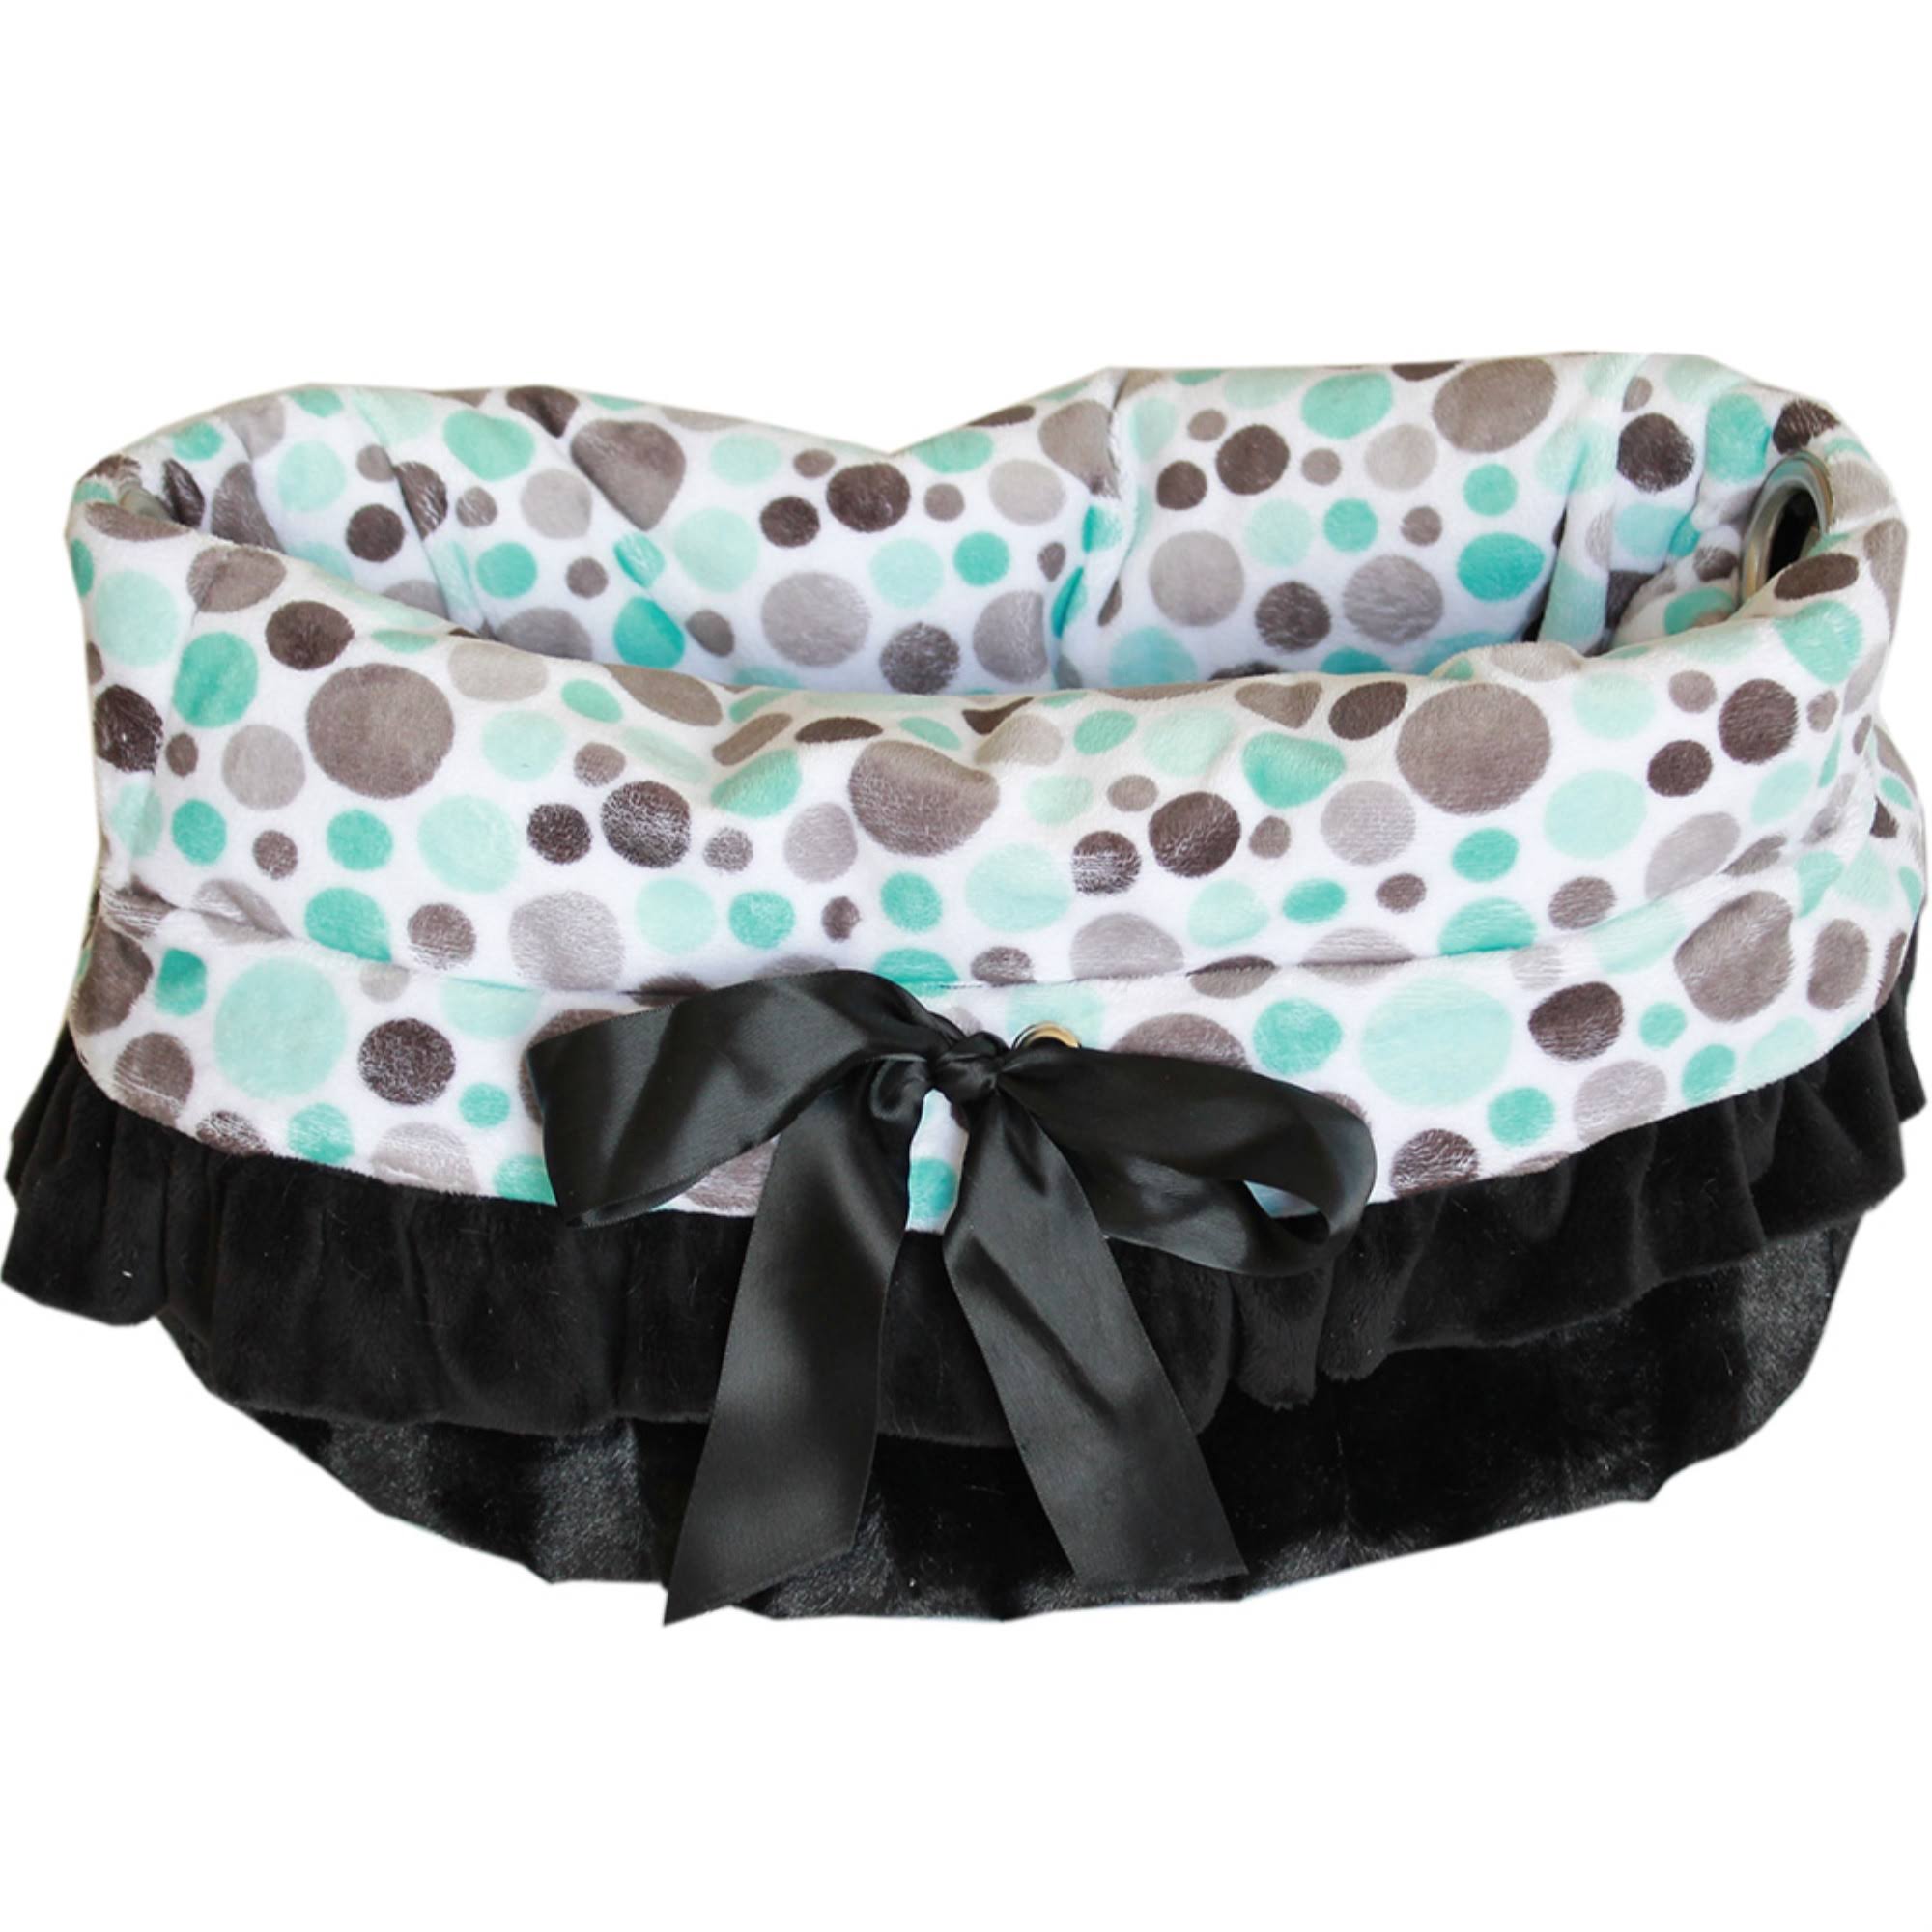 Aqua Party Dots Reversible Snuggle Bugs Pet Bed Bag and Car Seat All-in-One